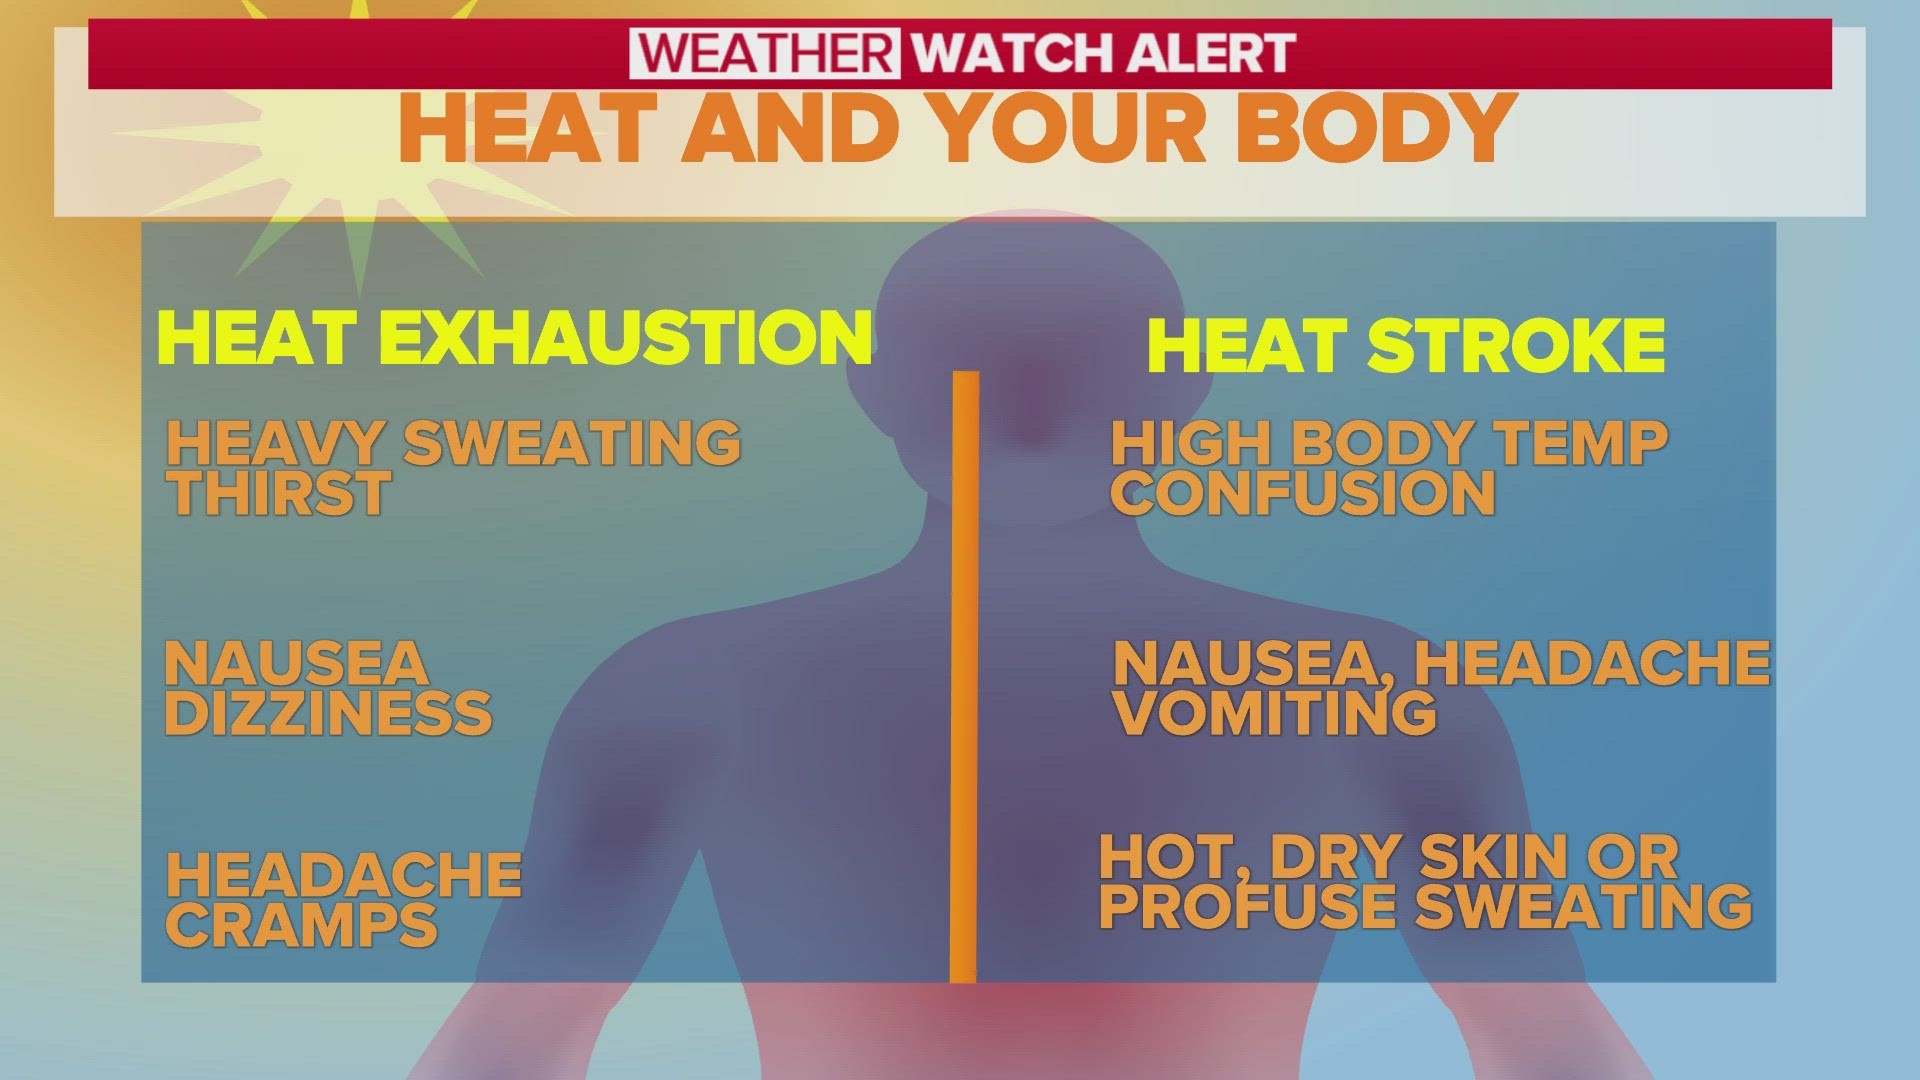 As temperatures rise, remember to listen to your body.